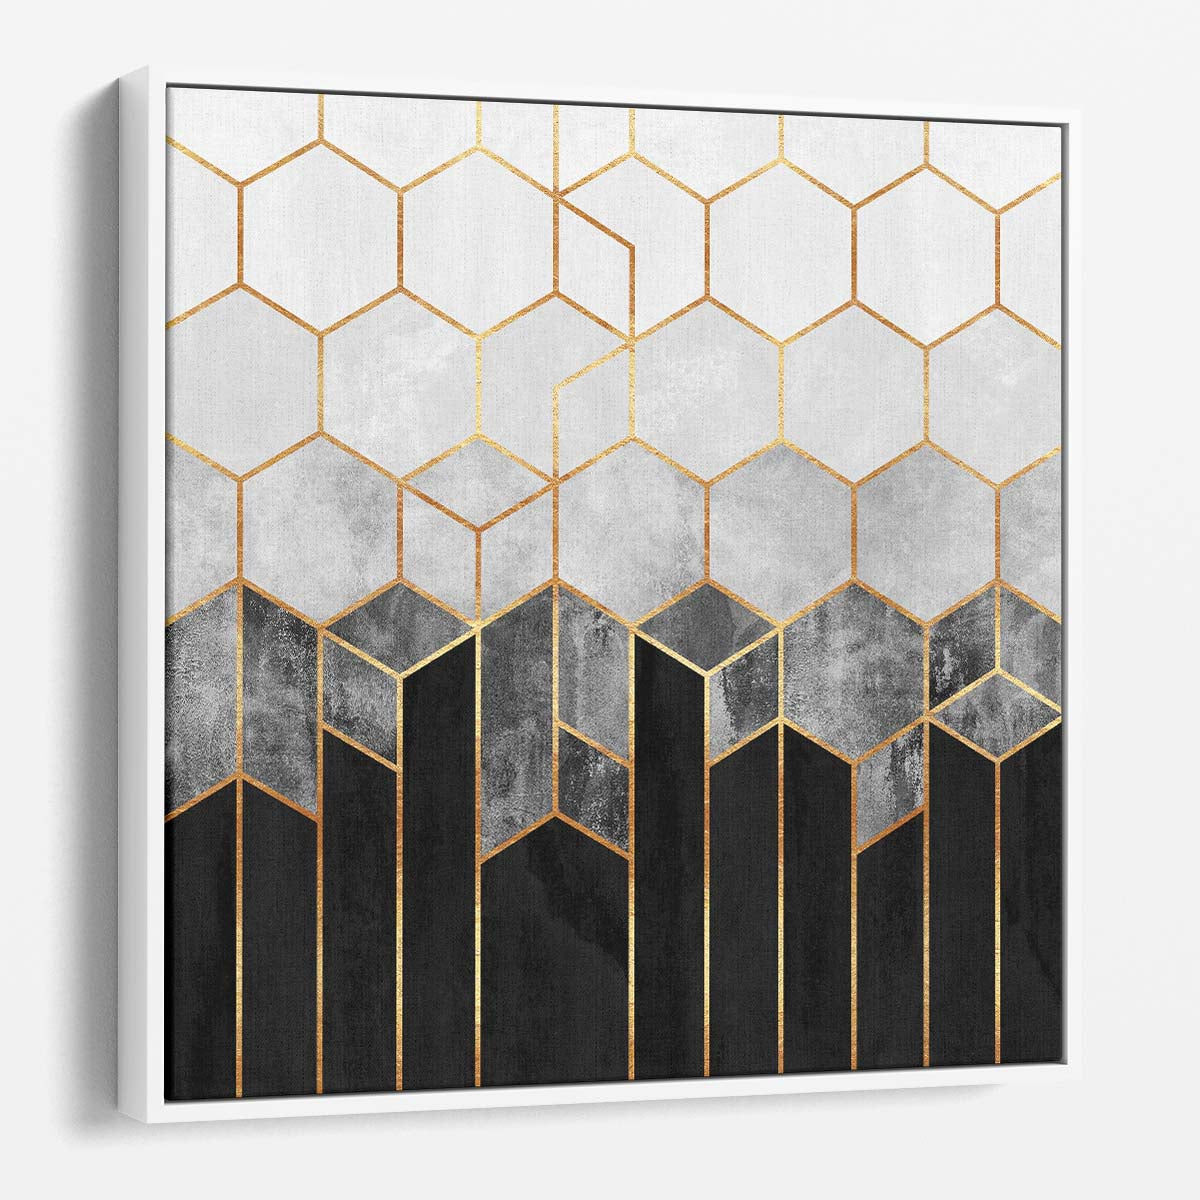 Abstract Geometric Gold & Charcoal Hexagon Illustration Wall Art by Luxuriance Designs. Made in USA.